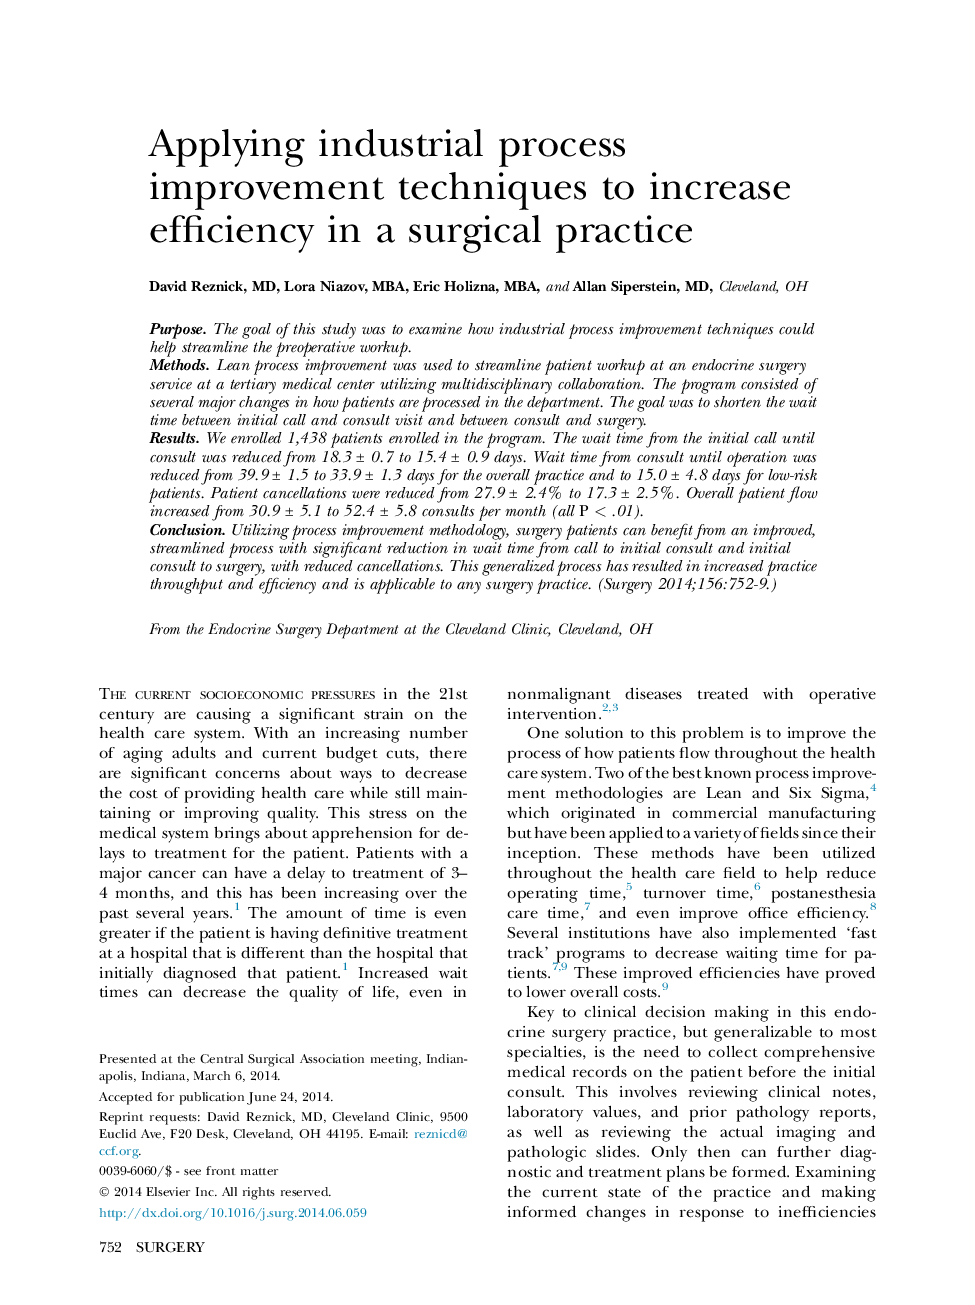 Applying industrial process improvement techniques to increase efficiency in a surgical practice